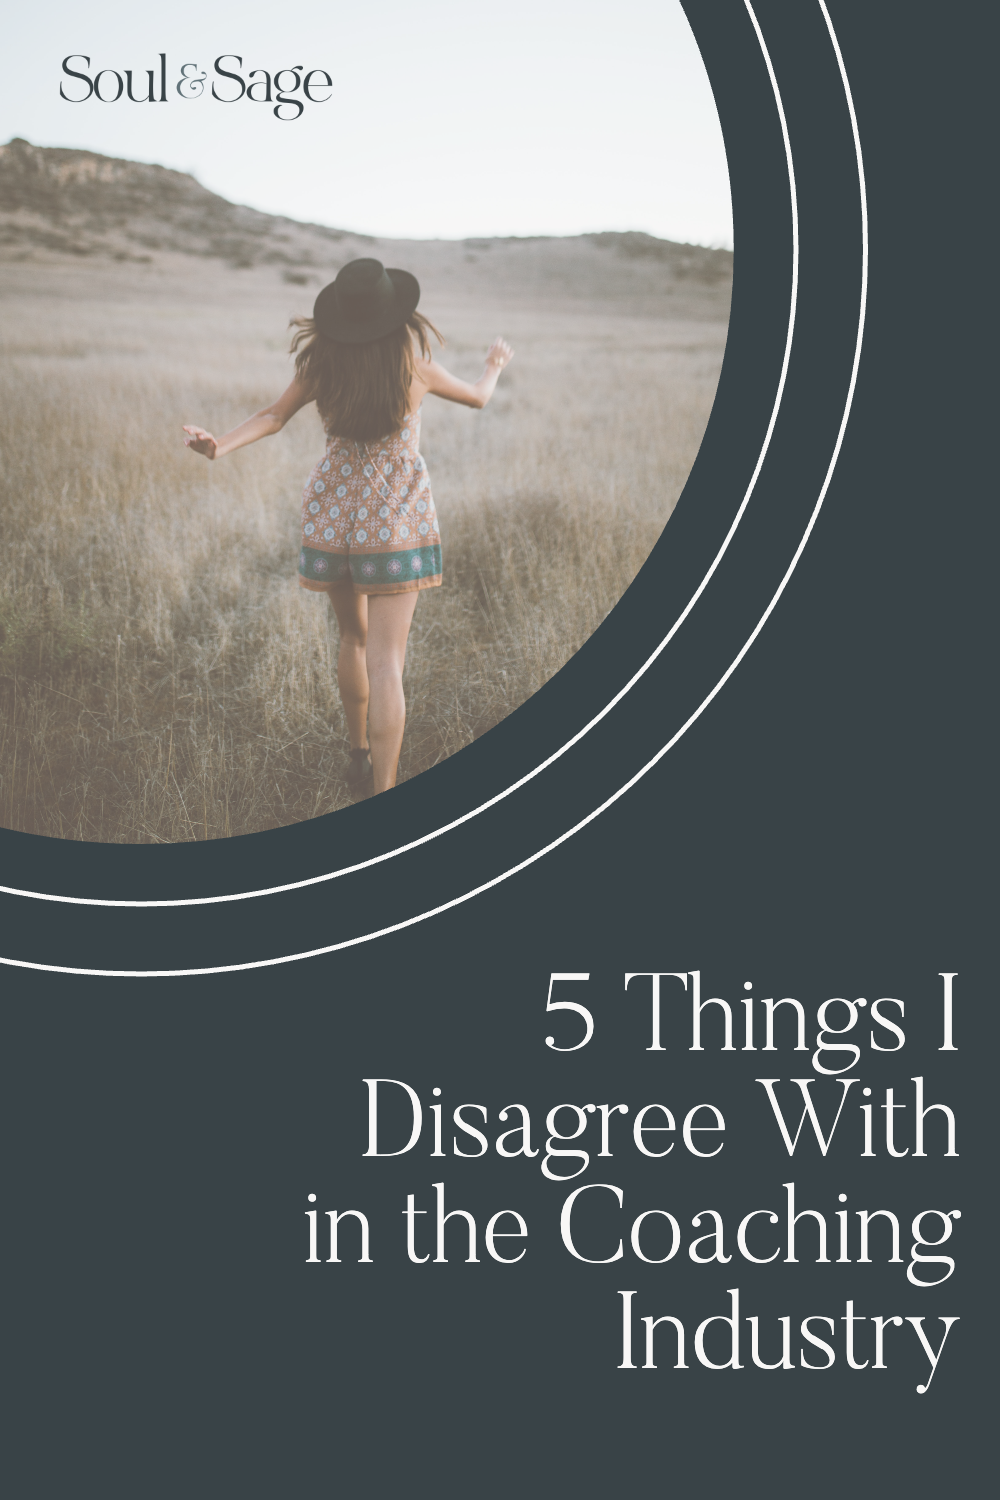 5 Things I Disagree With in the Coaching Industry - Soul & Sage